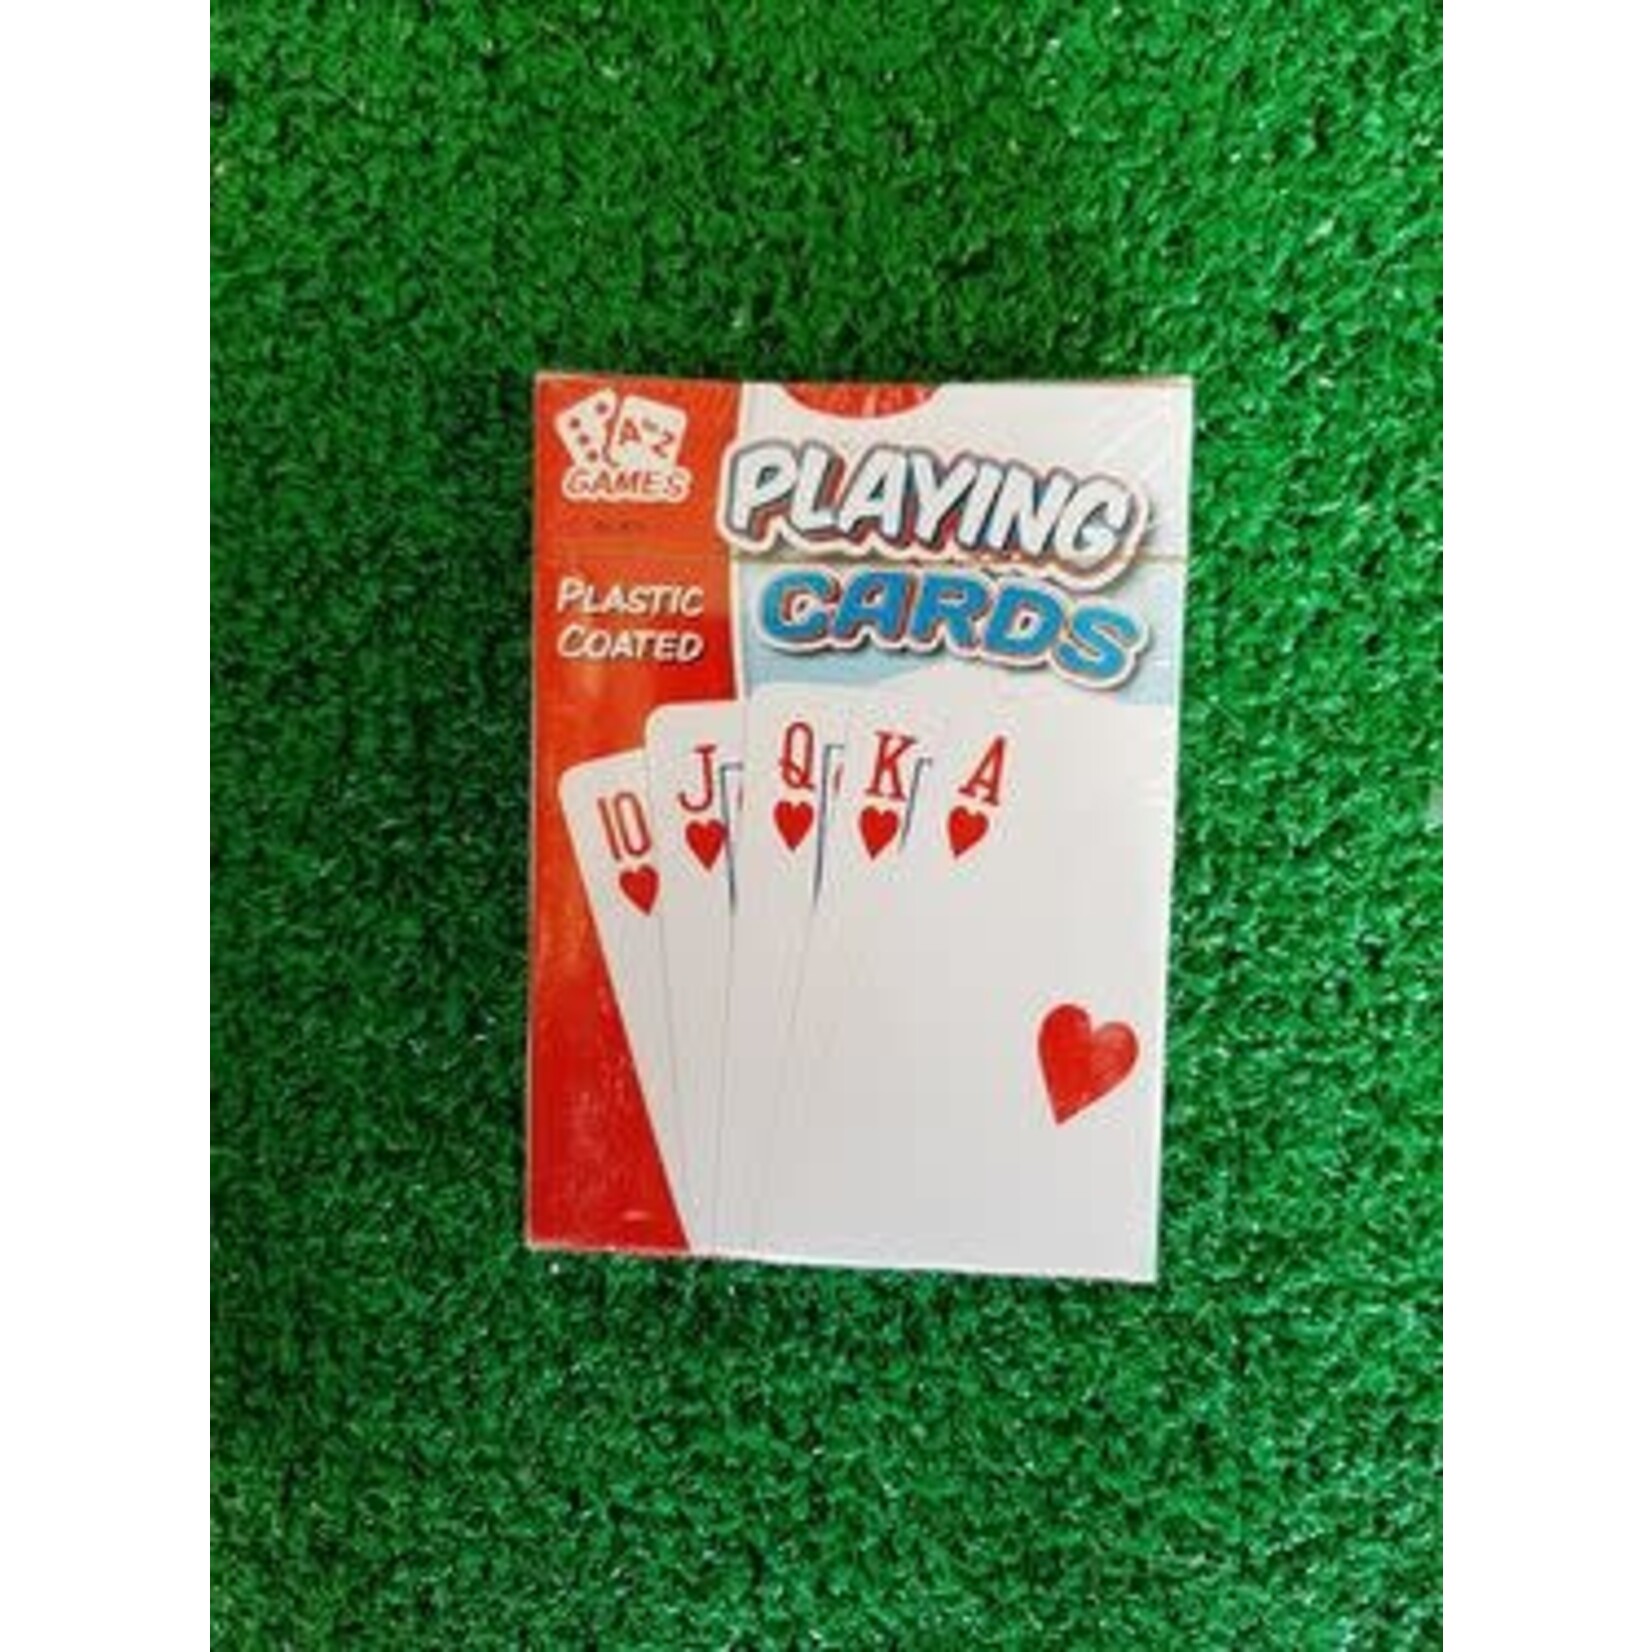 Playing Cards - Plastic Coated